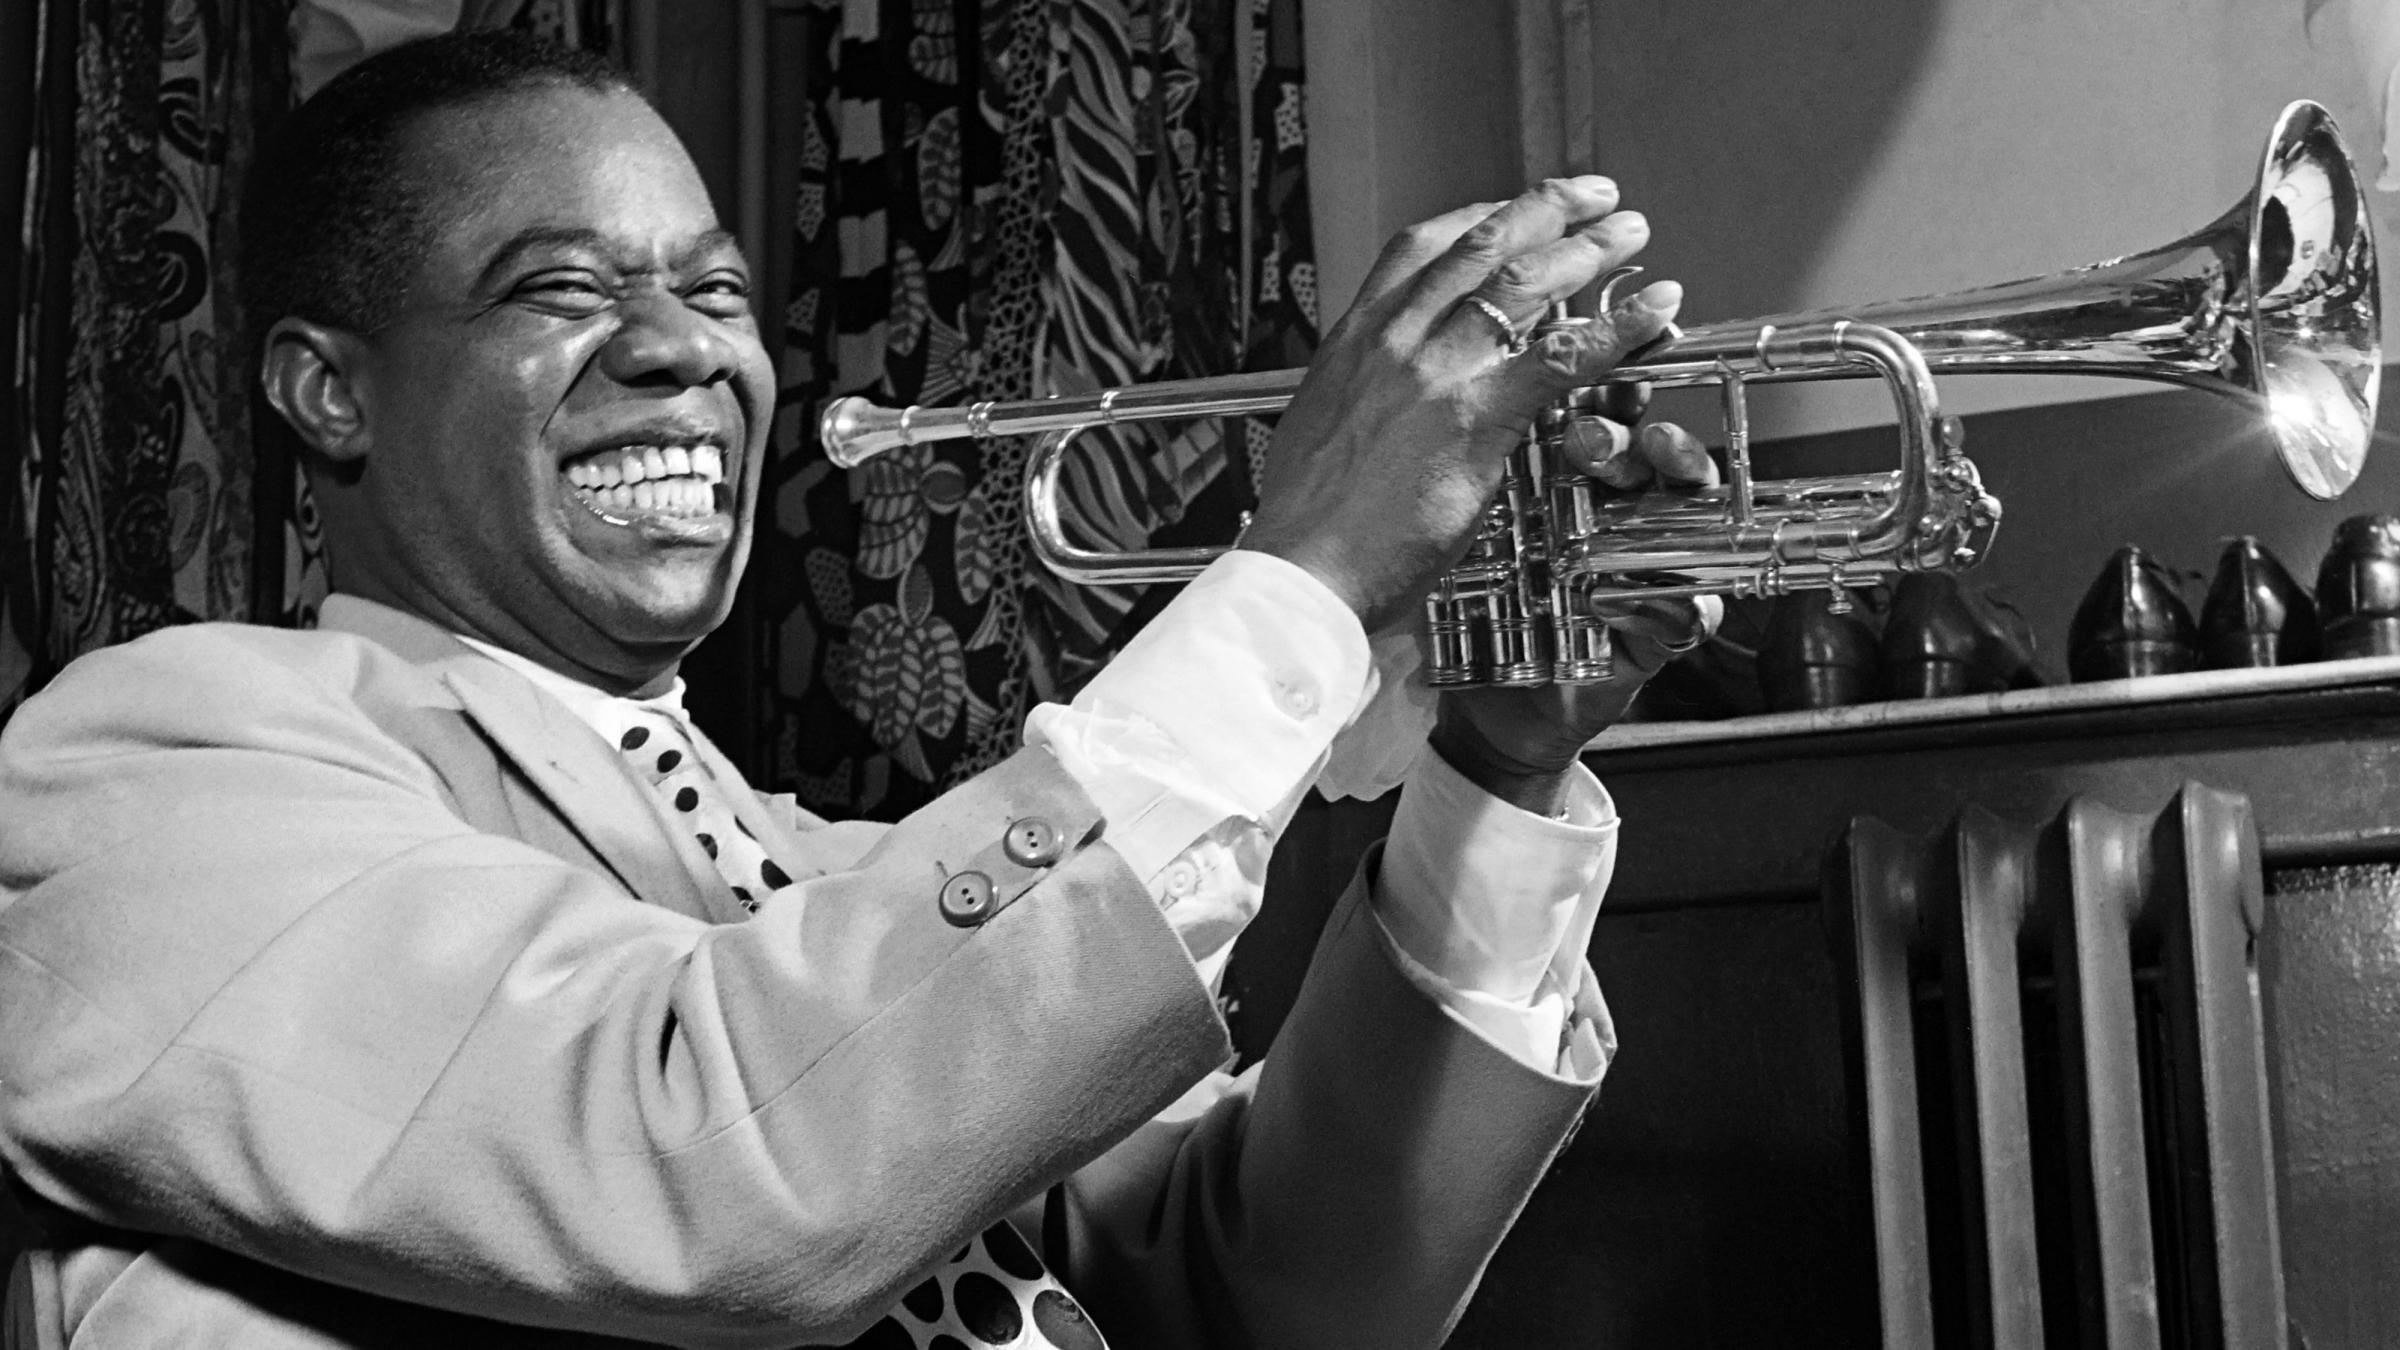 March 1950: Louis Armstrong plays trumpet in his dressing room before a show in New York.